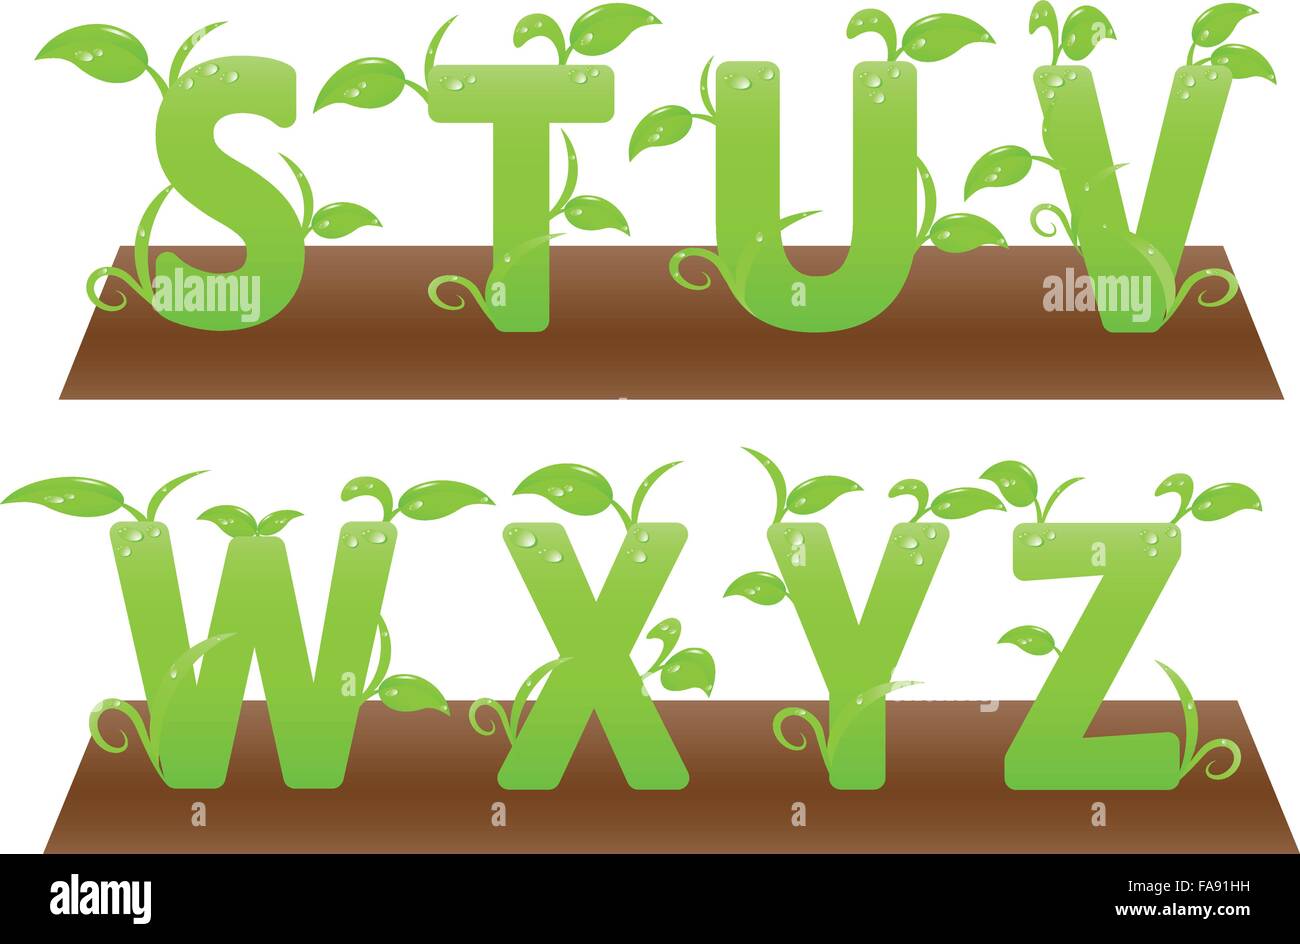 Environment friendly English alphabets from S to Z. Well managed vector eps10 file is included. Stock Vector